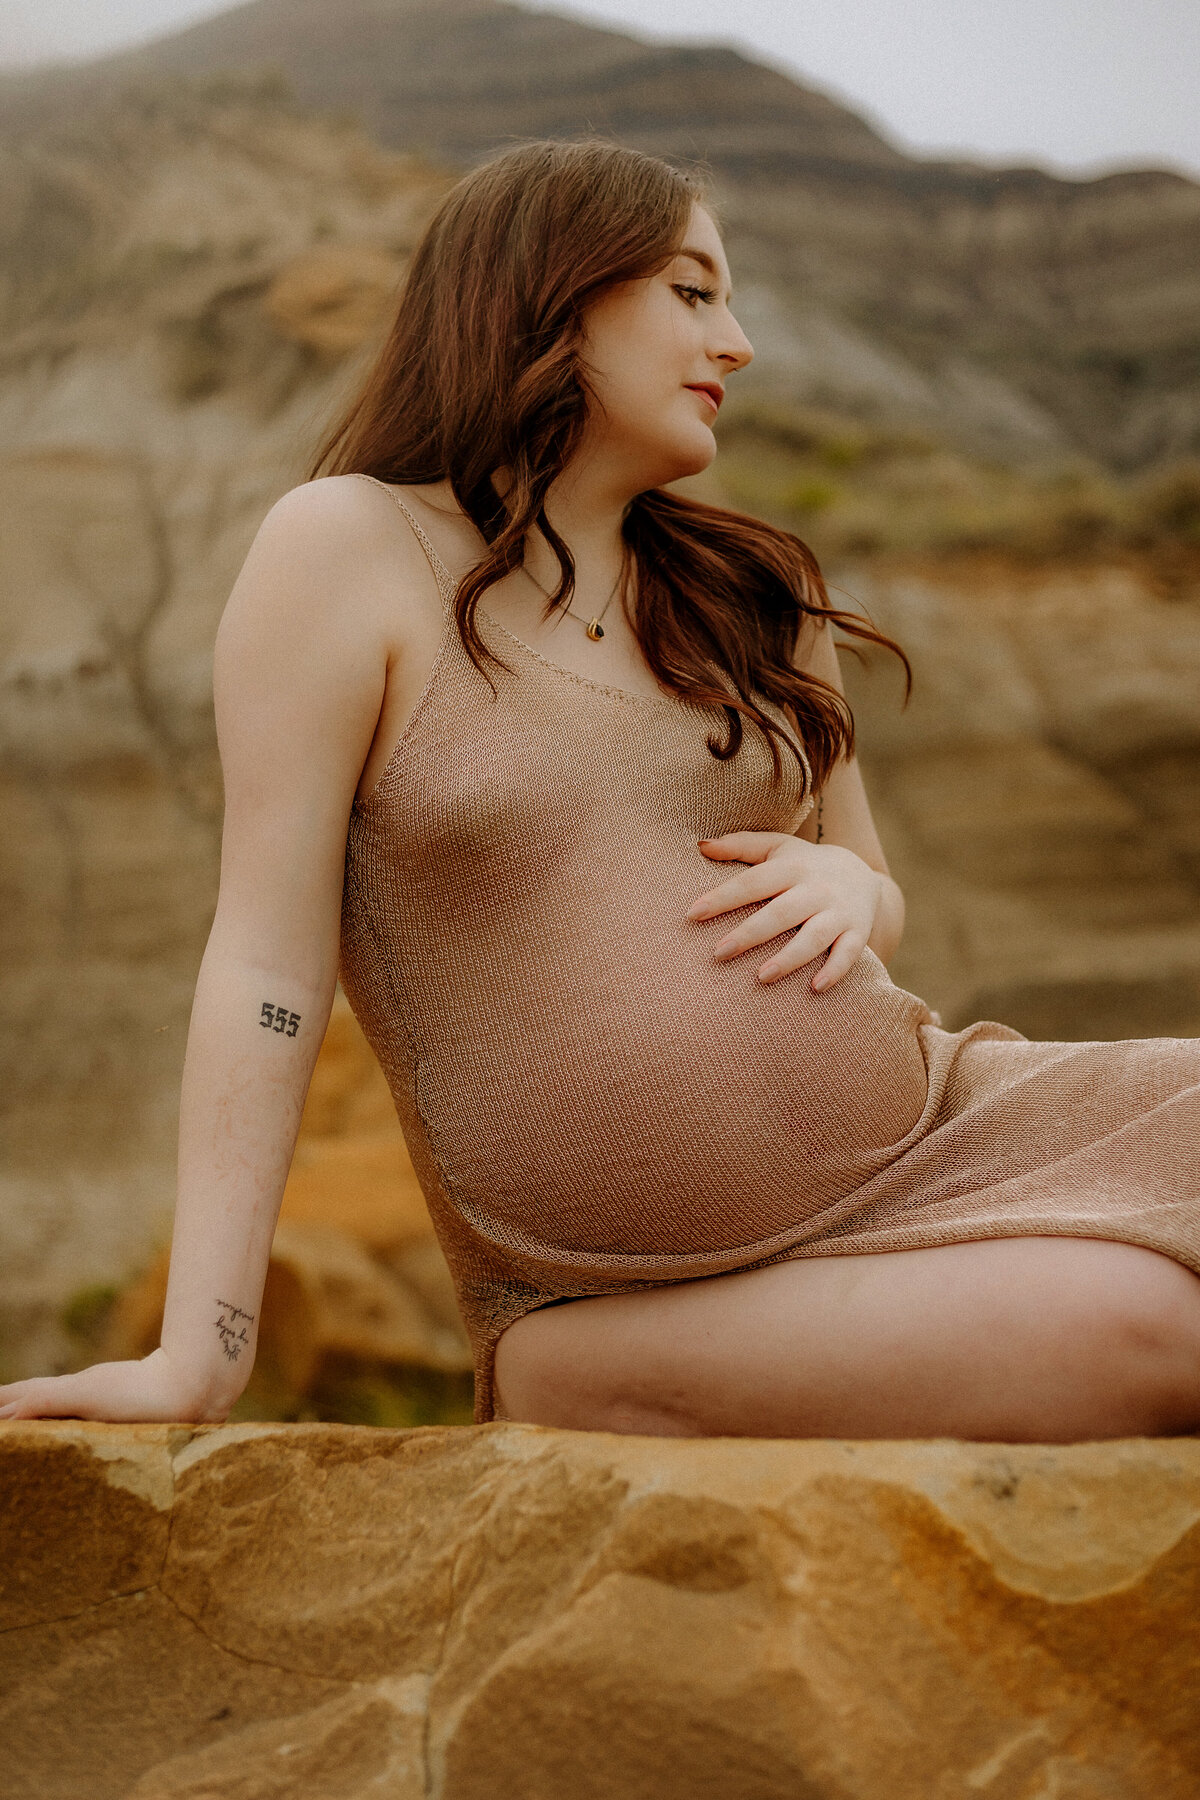 Celebrate the greatest creation of your life through my Calgary maternity artistry. Boldly preserve this extraordinary time with powerful and evocative photography